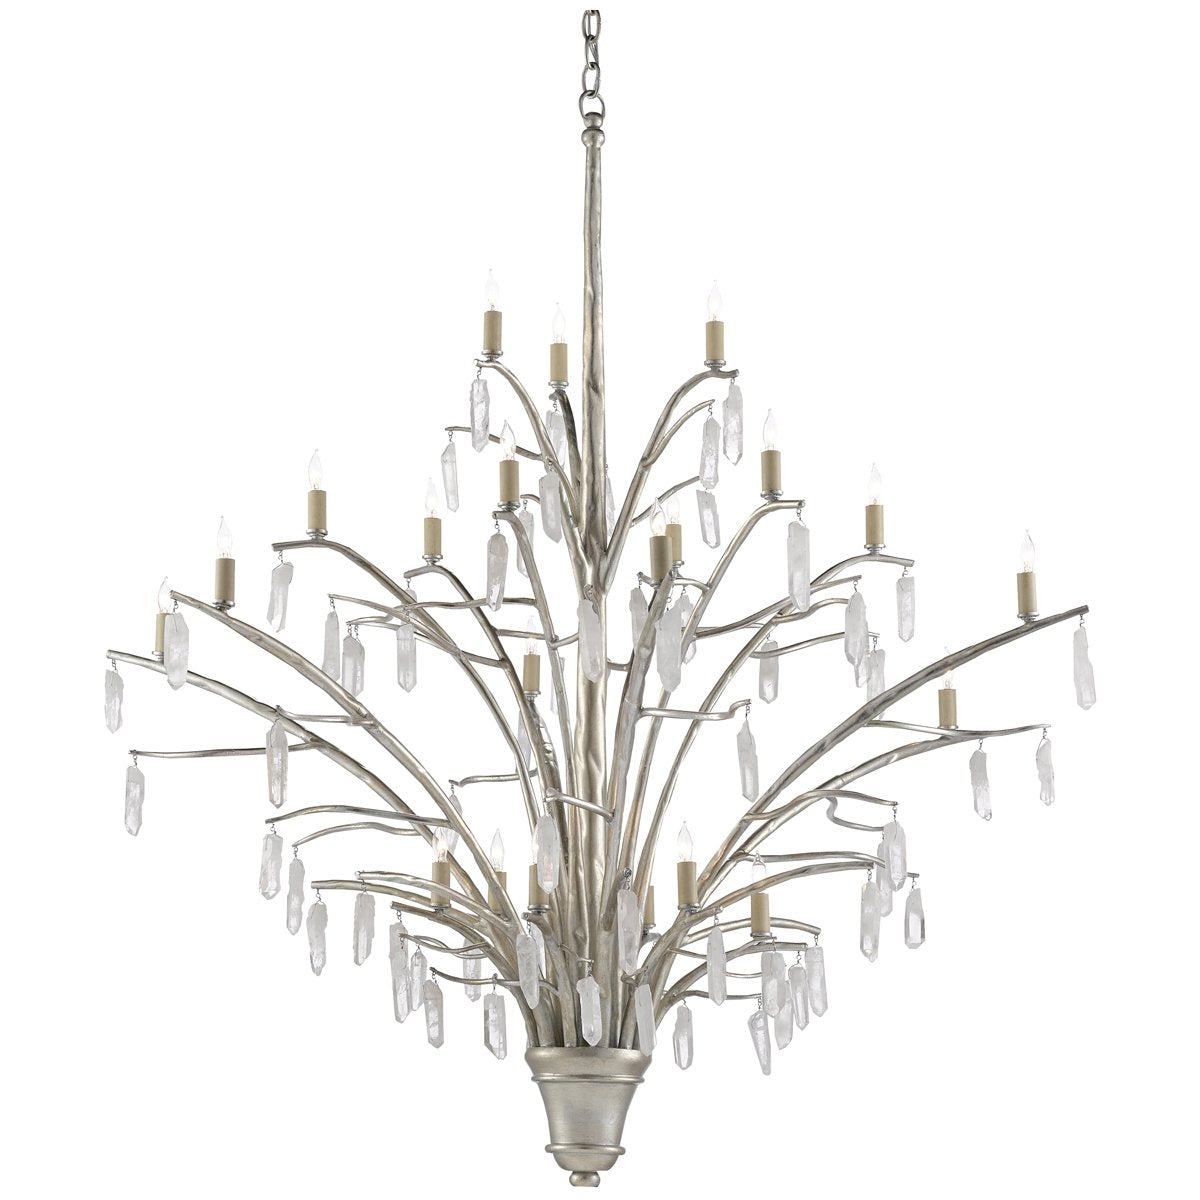 Currey and Company Raux Chandelier